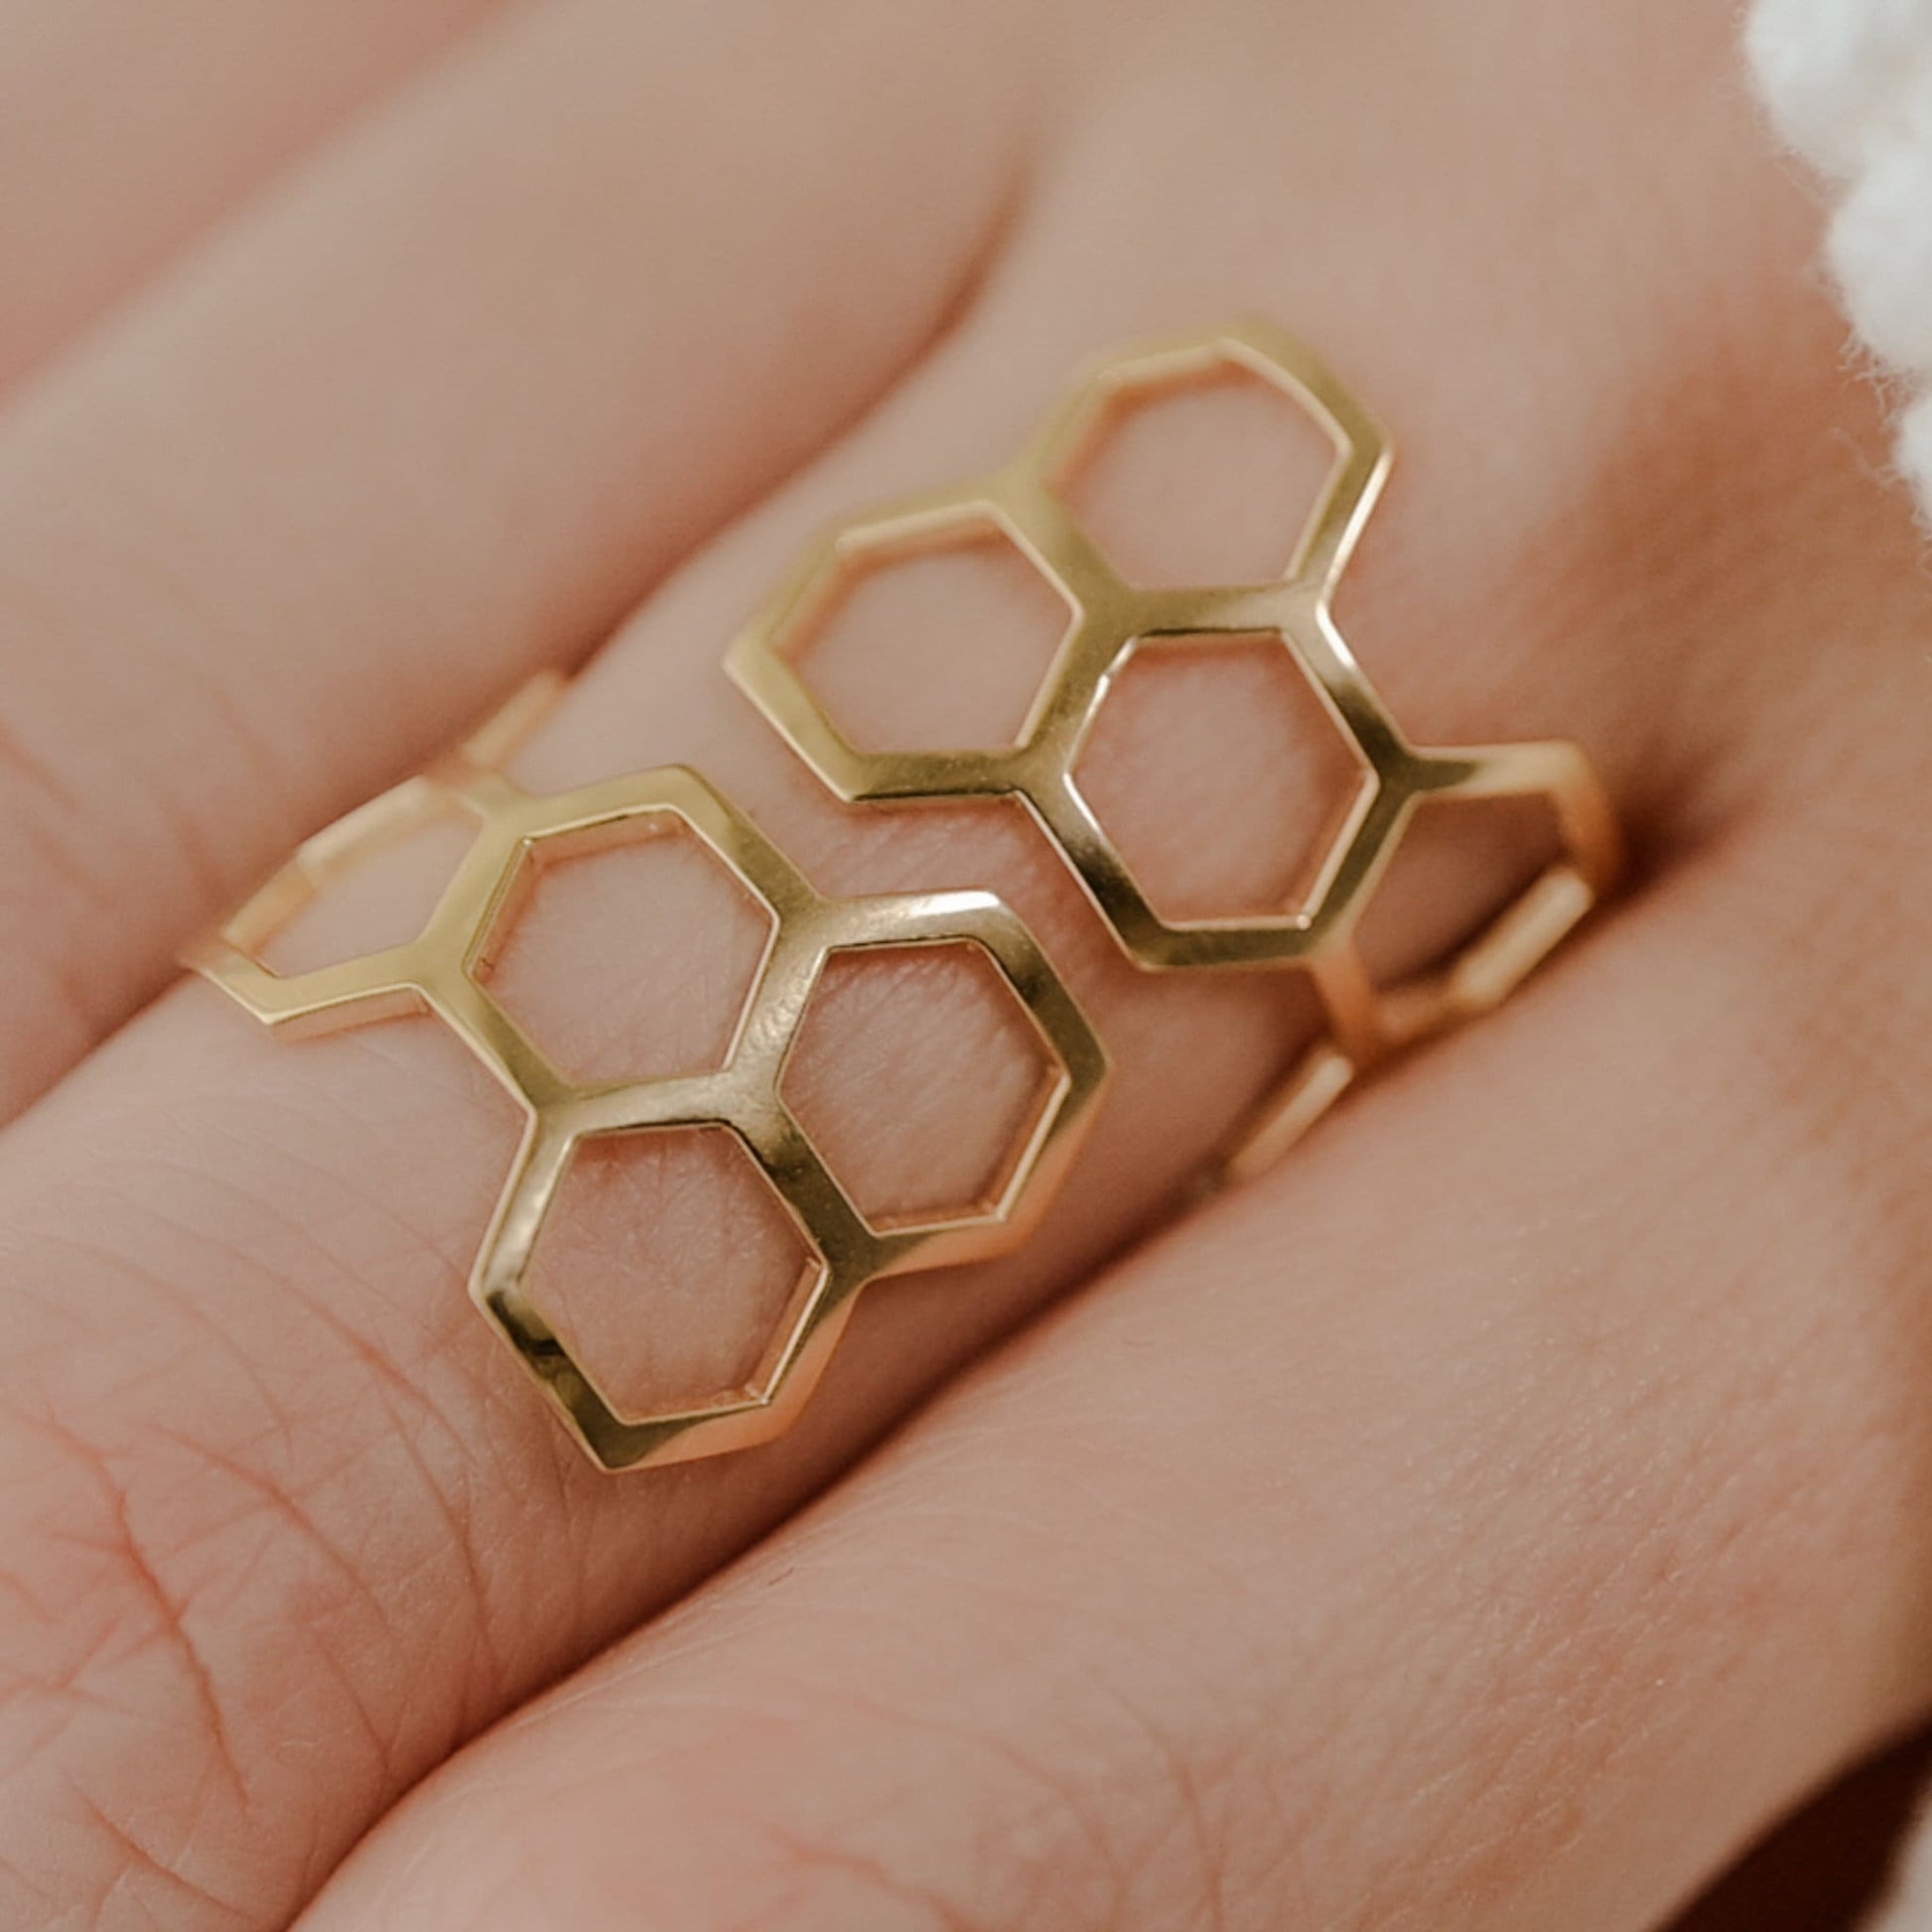 Hexagon Honey Comb Ring Adjustable Ring in Solid Gold